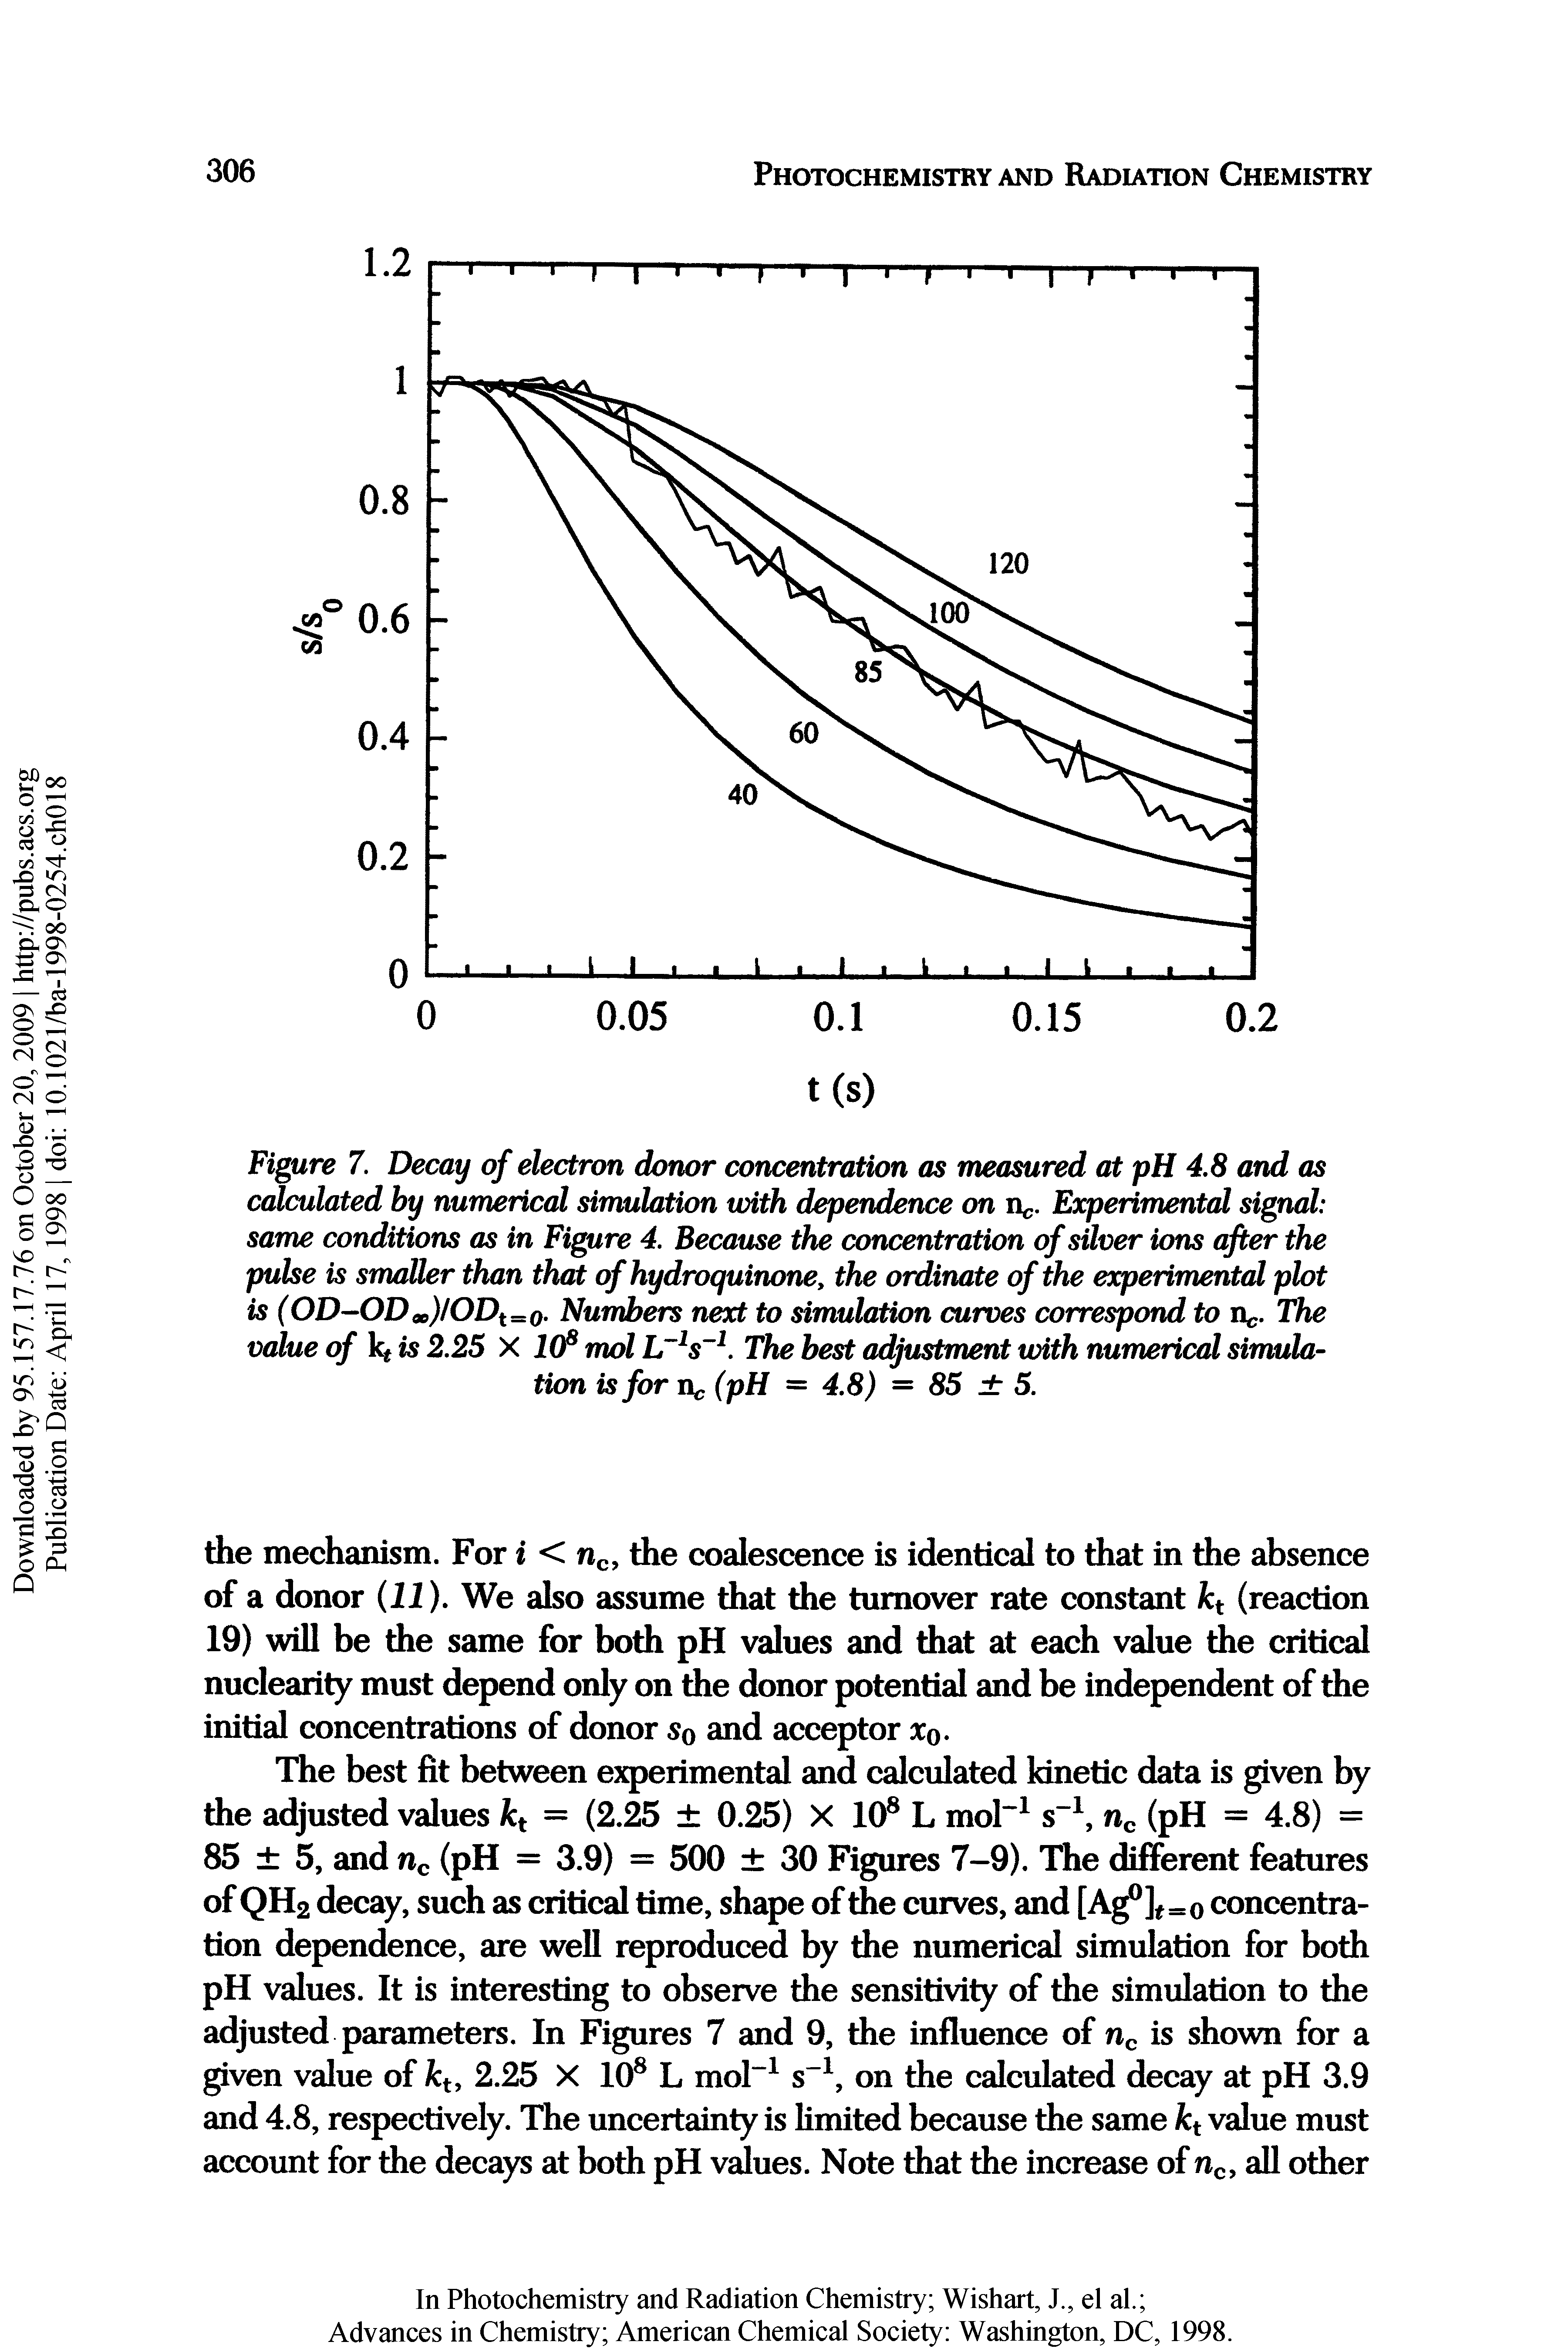 Figure 7. Decay of electron donor concentration as measured at pH 4.8 and as calculated by numerical simulation with dependence on n. Experimental signal-same conditions as in Figure 4. Because the concentration of silver ions after the puke is smaller than that of hydroquinone, the ordinate of the experimental plot is (OD-OD j/ODt=o- Numbers next to simulation curves correspond to n. The value of Is 2.25 X JO mol The best adjustment unth numerical simula-...